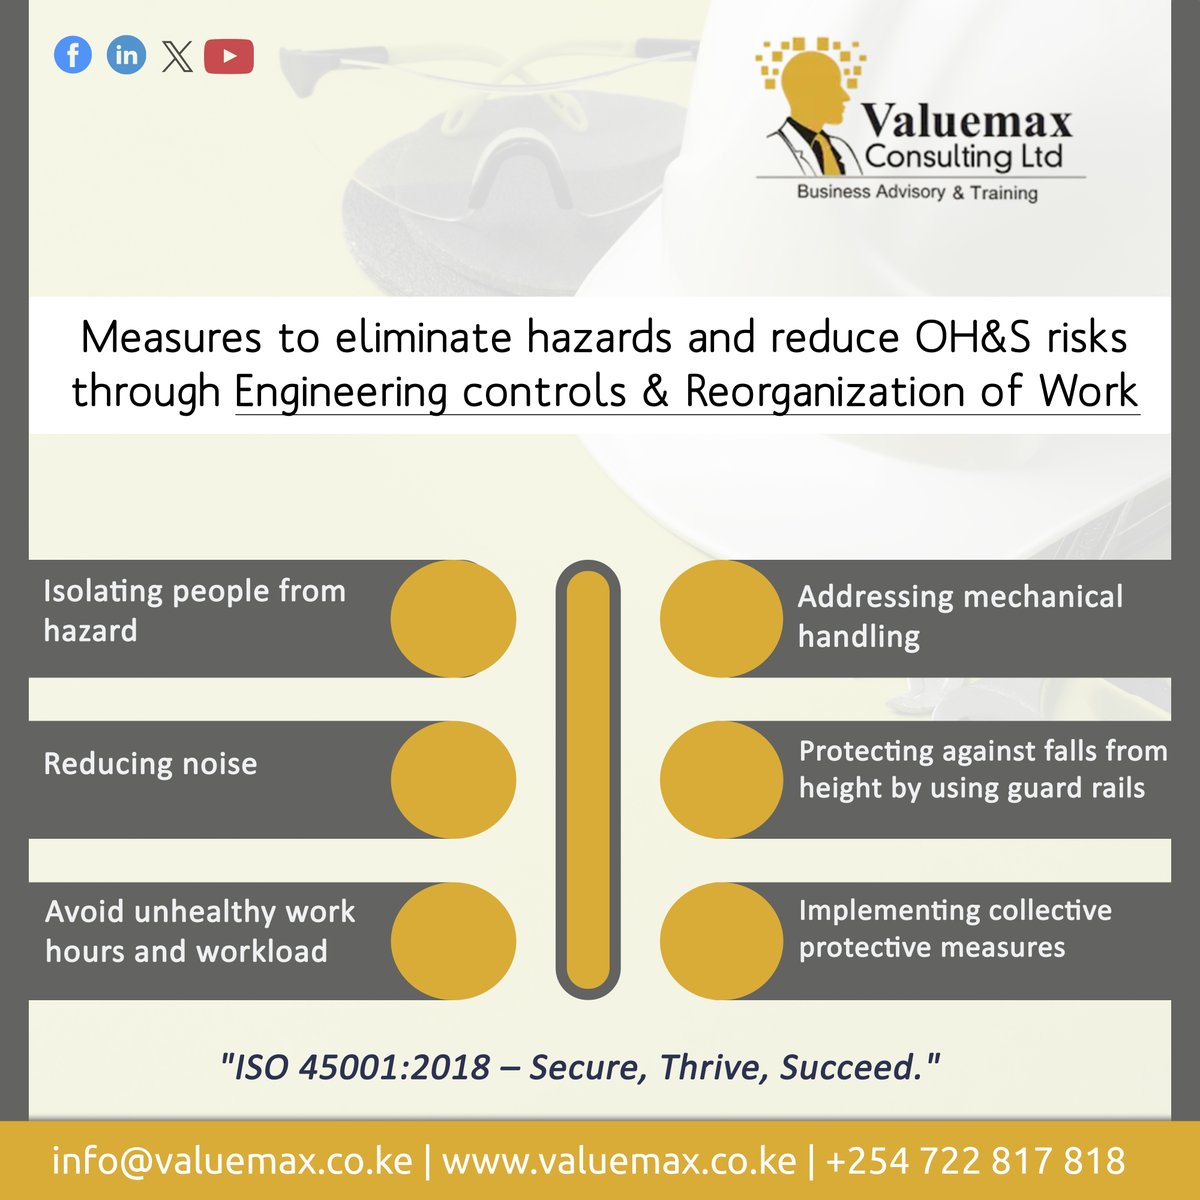 1/2
Occupationational, health & safety risks can be eliminated through engineering controls & reorganization of work. 

Some of the measures that an organization can take are: 

⚠️ Isolating people from hazards
⚠️ Addressing mechanical handling

#OHS #worksafety #ISO45001